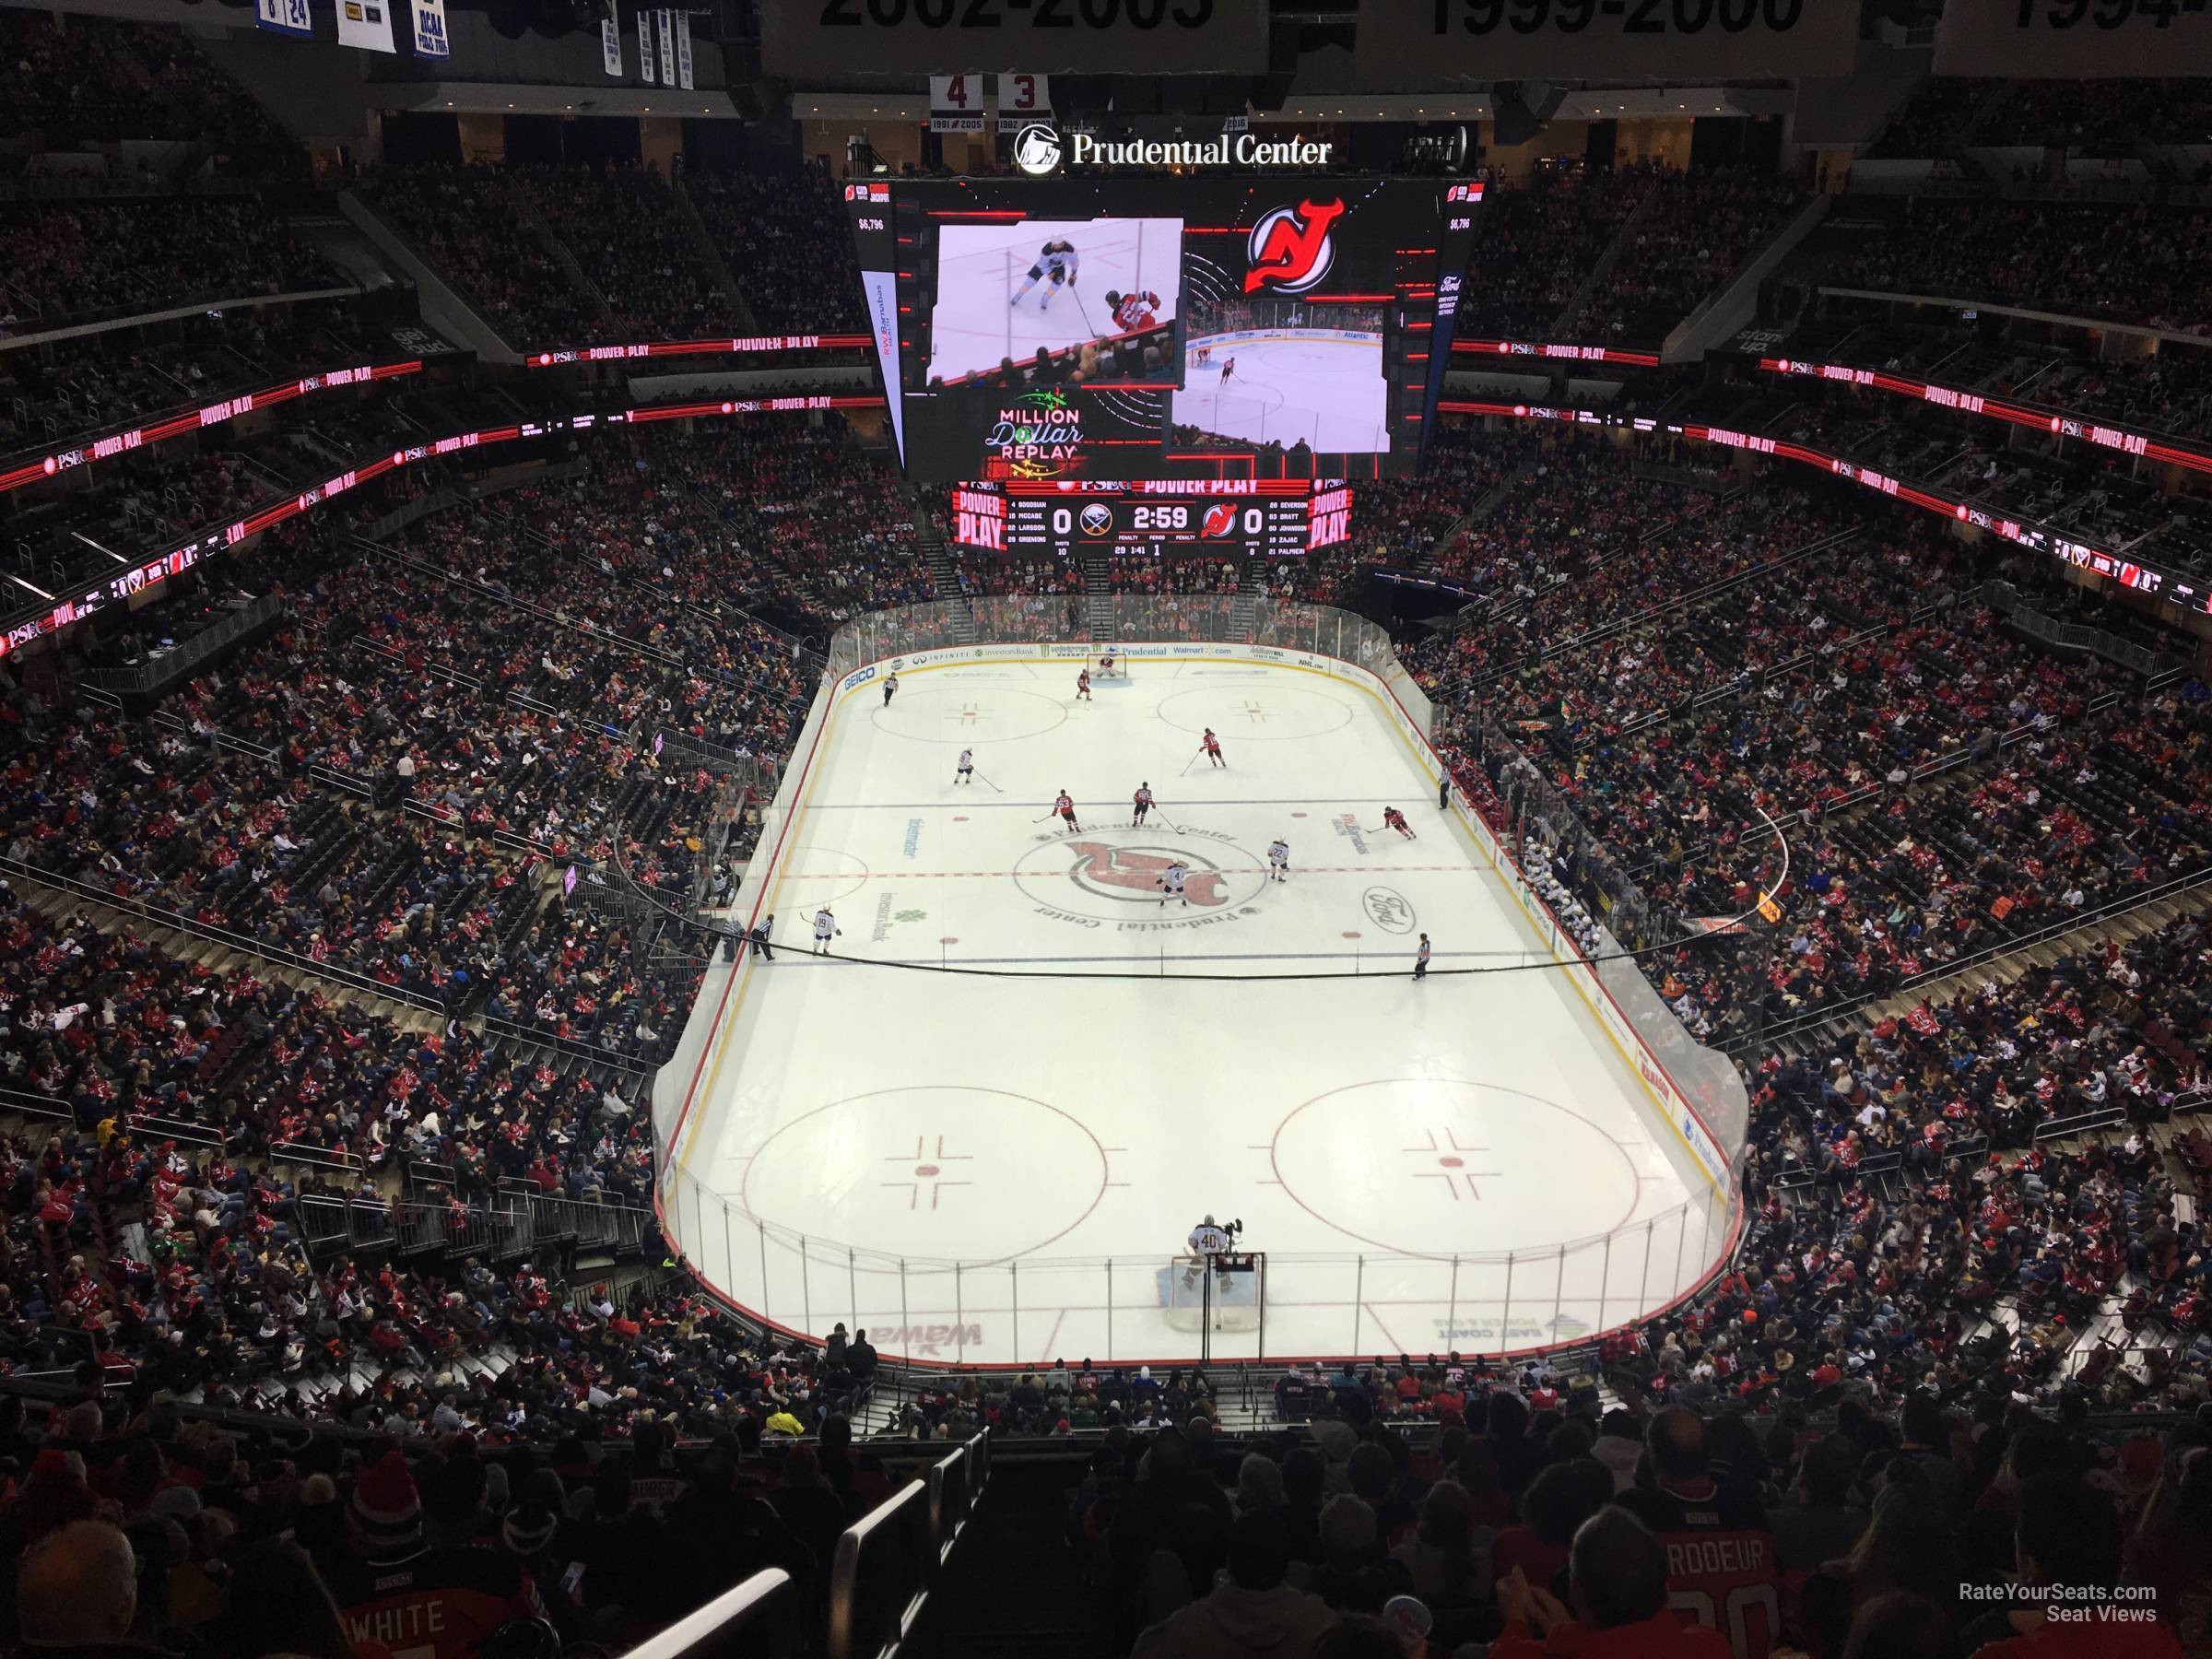 section 103, row 6 seat view  for hockey - prudential center